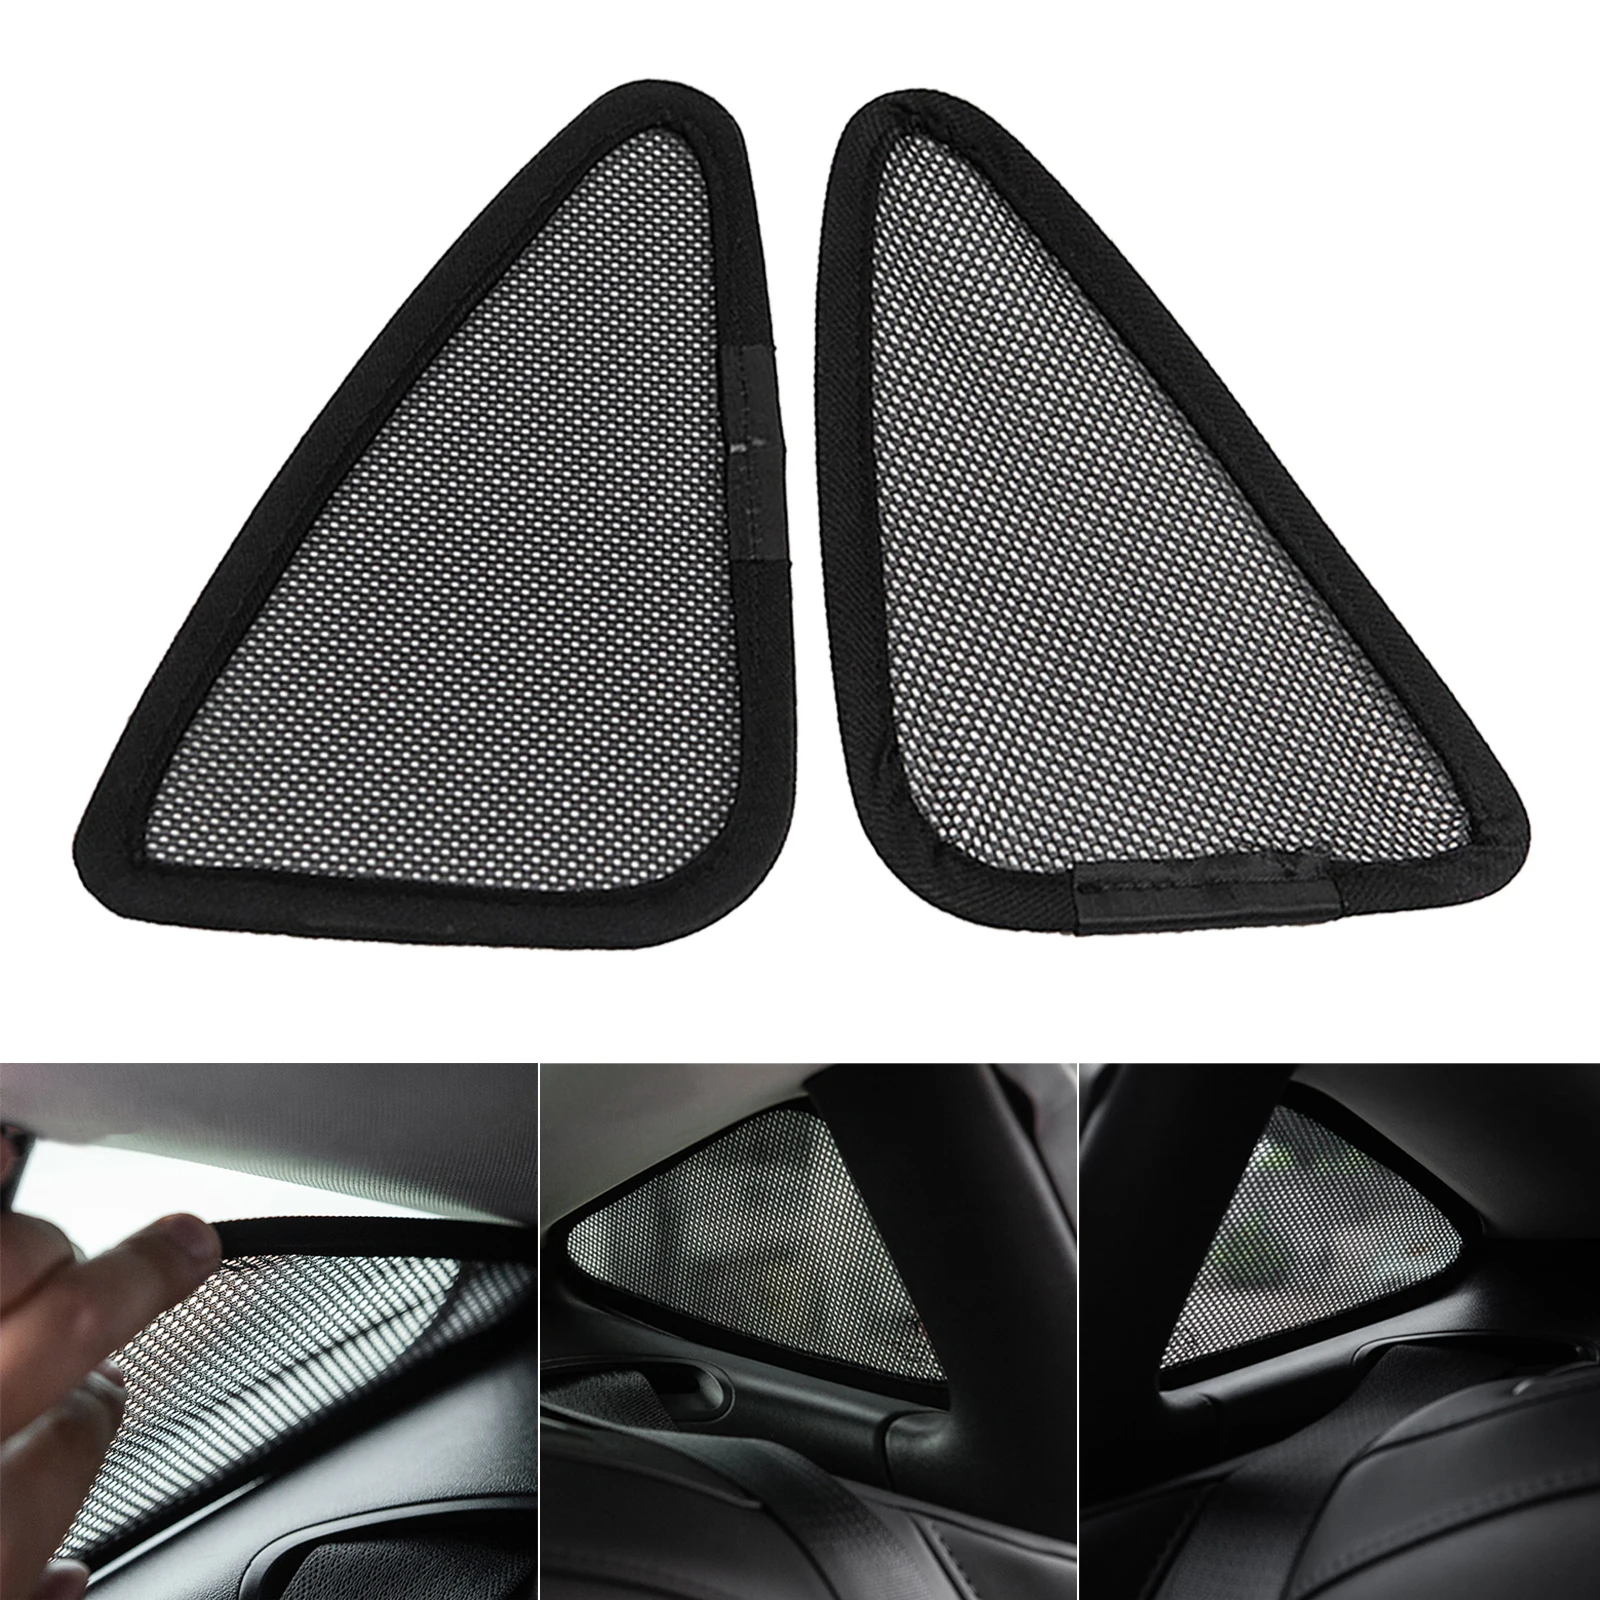 2x Car Sunshade Cover Triangular Protector for Tesla Model 3 Accessories